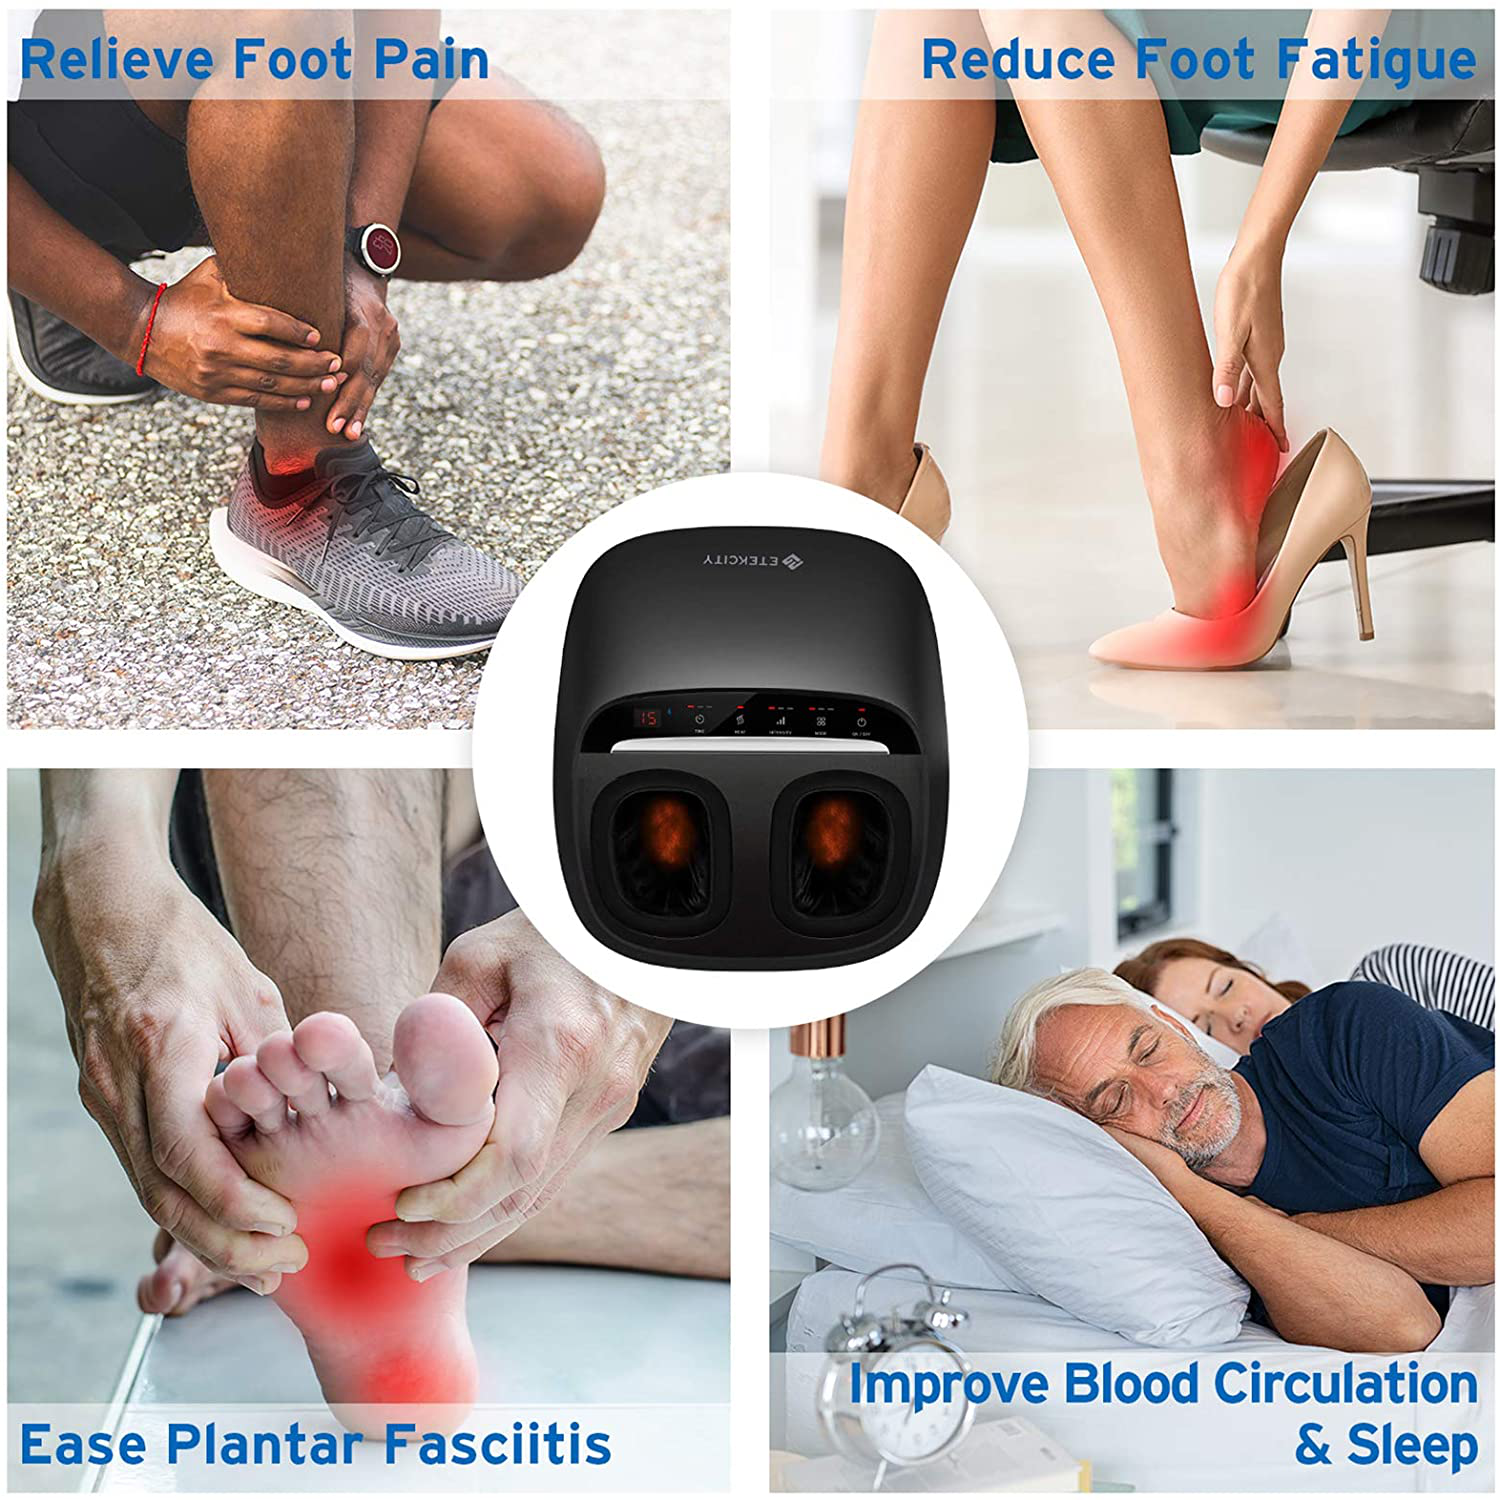 Etekcity Foot Massager Machine with Heat and APP Remote, Gifts for Women Mom Men Dad, Shiatsu Deep Kneading & Multi Air Compression, Relieve Foot Pain and Plantar Fasciitis, Fit up to Men Size 12